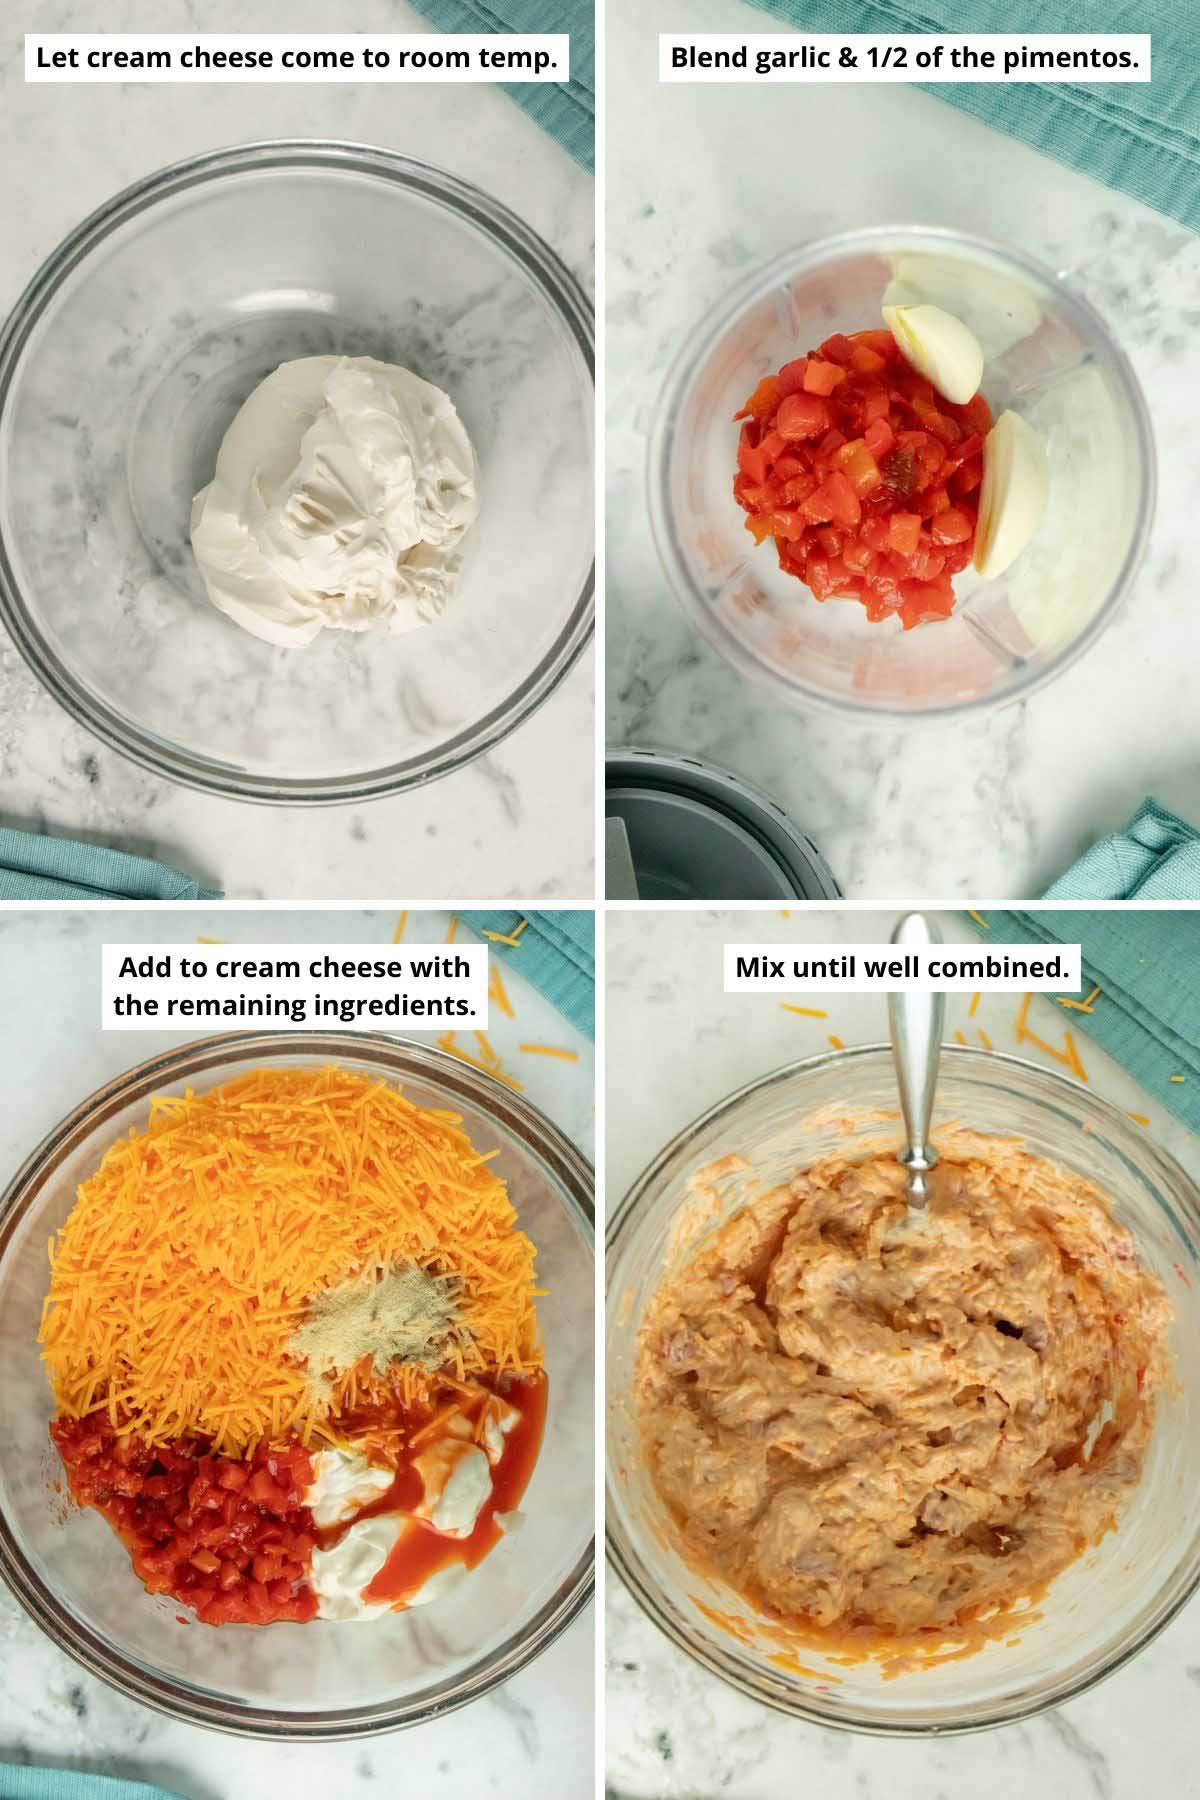 image collage showing a bowl of vegan cream cheese, pimentos and garlic in the blender, and the vegan pimento cheese ingredients in the bowl before and after mixing them together